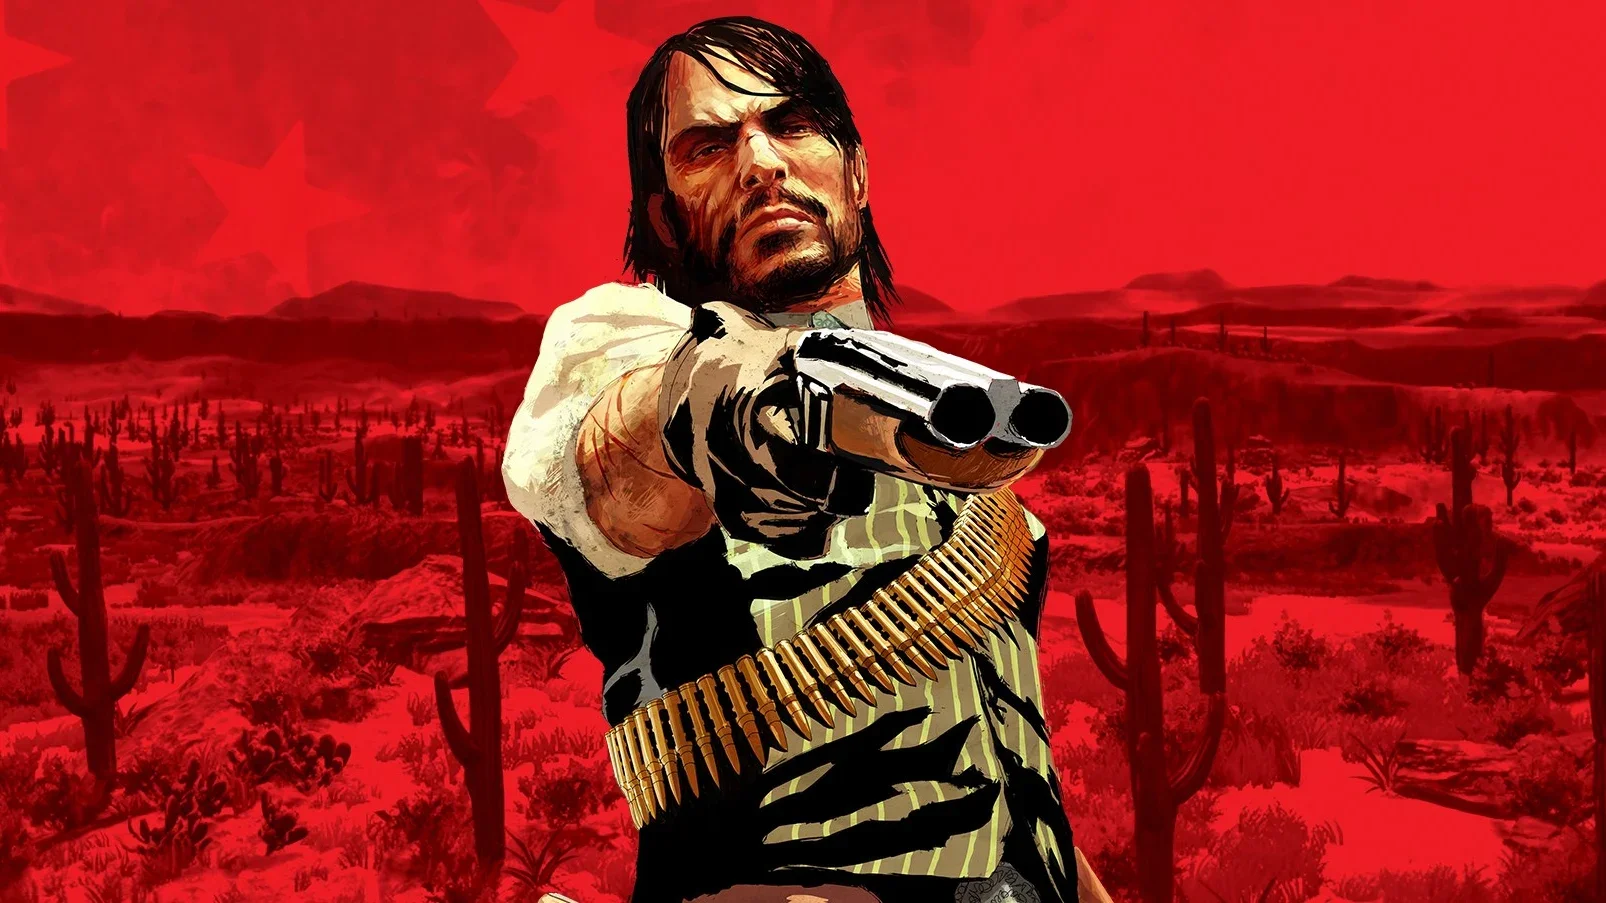 Red Dead Redemption won't be coming to PC anytime soon